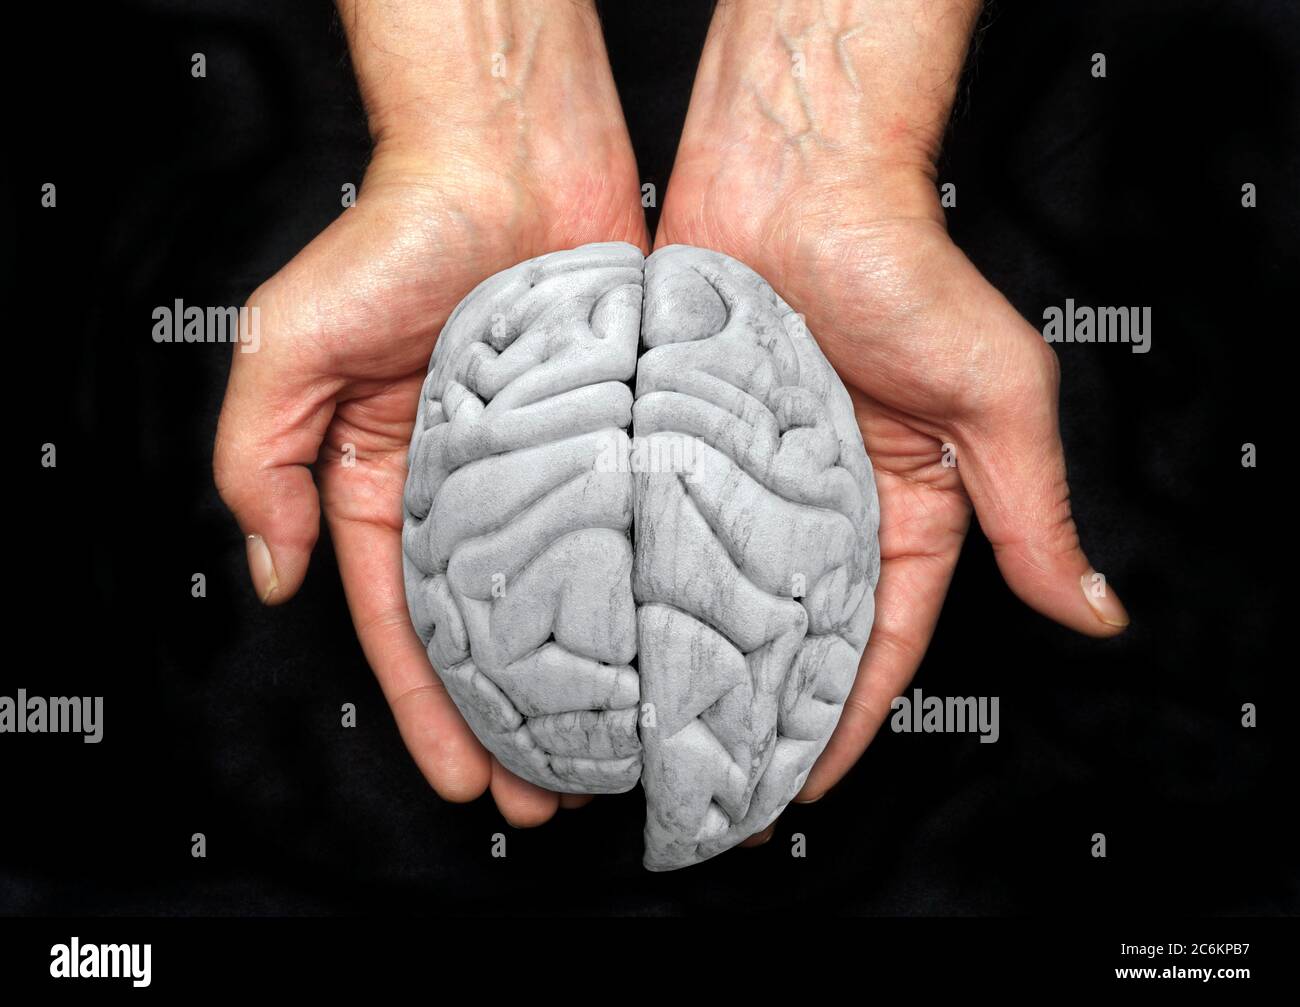 Enlarged left cerebral hemisphere, conceptual image. This could represent hemimegalencephaly (HME), a rare neurological condition in which one side of the brain is abnormally larger than the other. It could also represent using one side of the brain more than the. Stock Photo